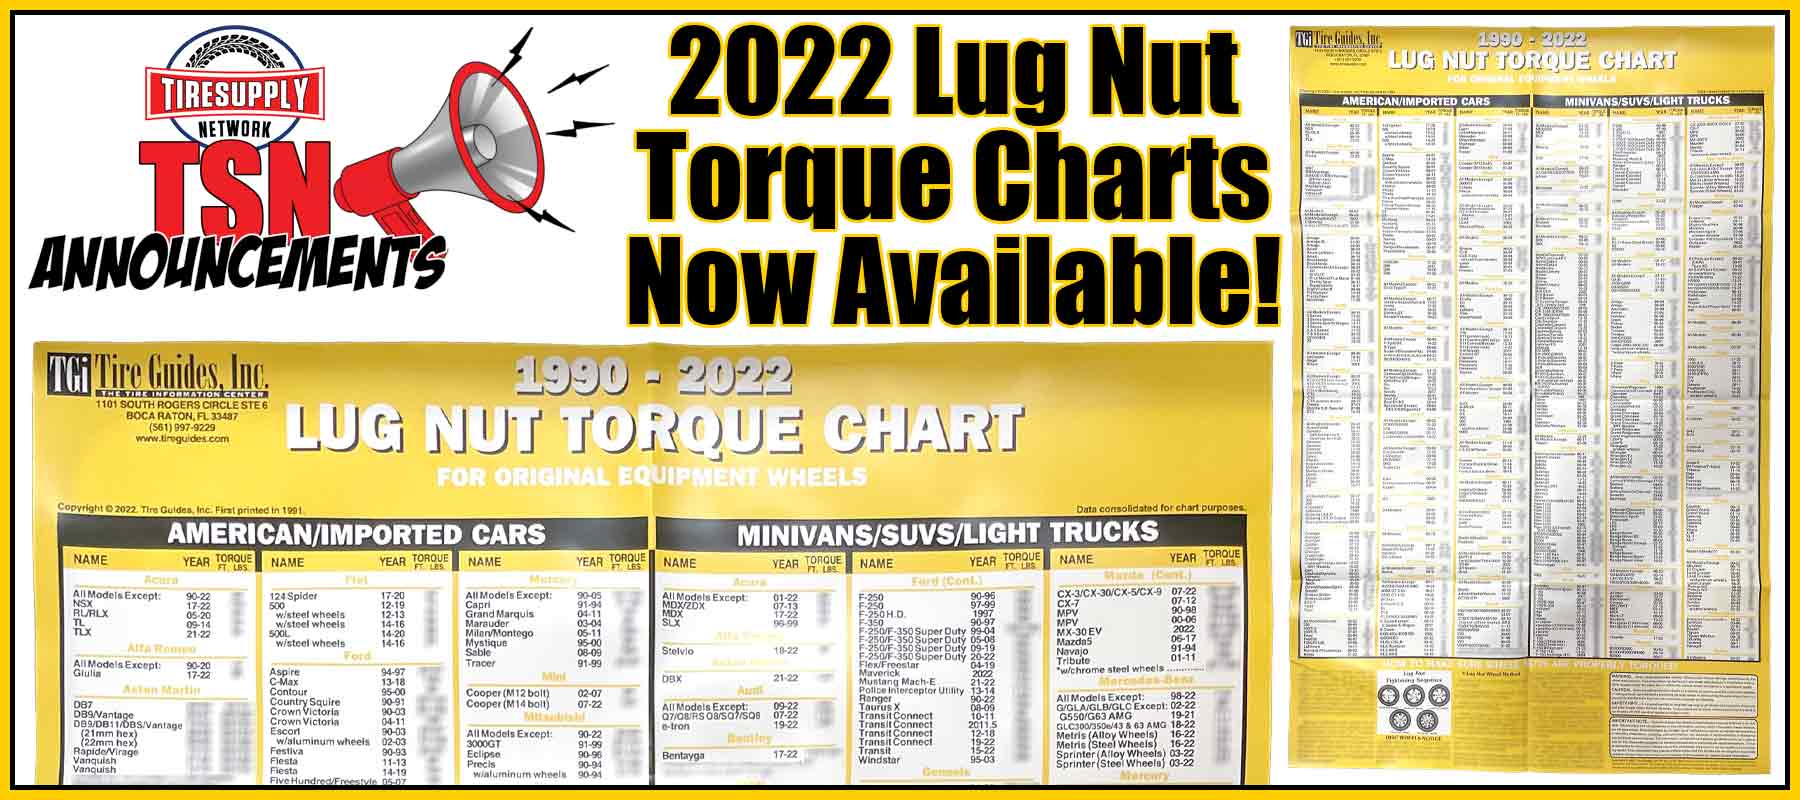 The New 2022 Lug Nut Torque Chart is Now Available at Tire Supply Network!